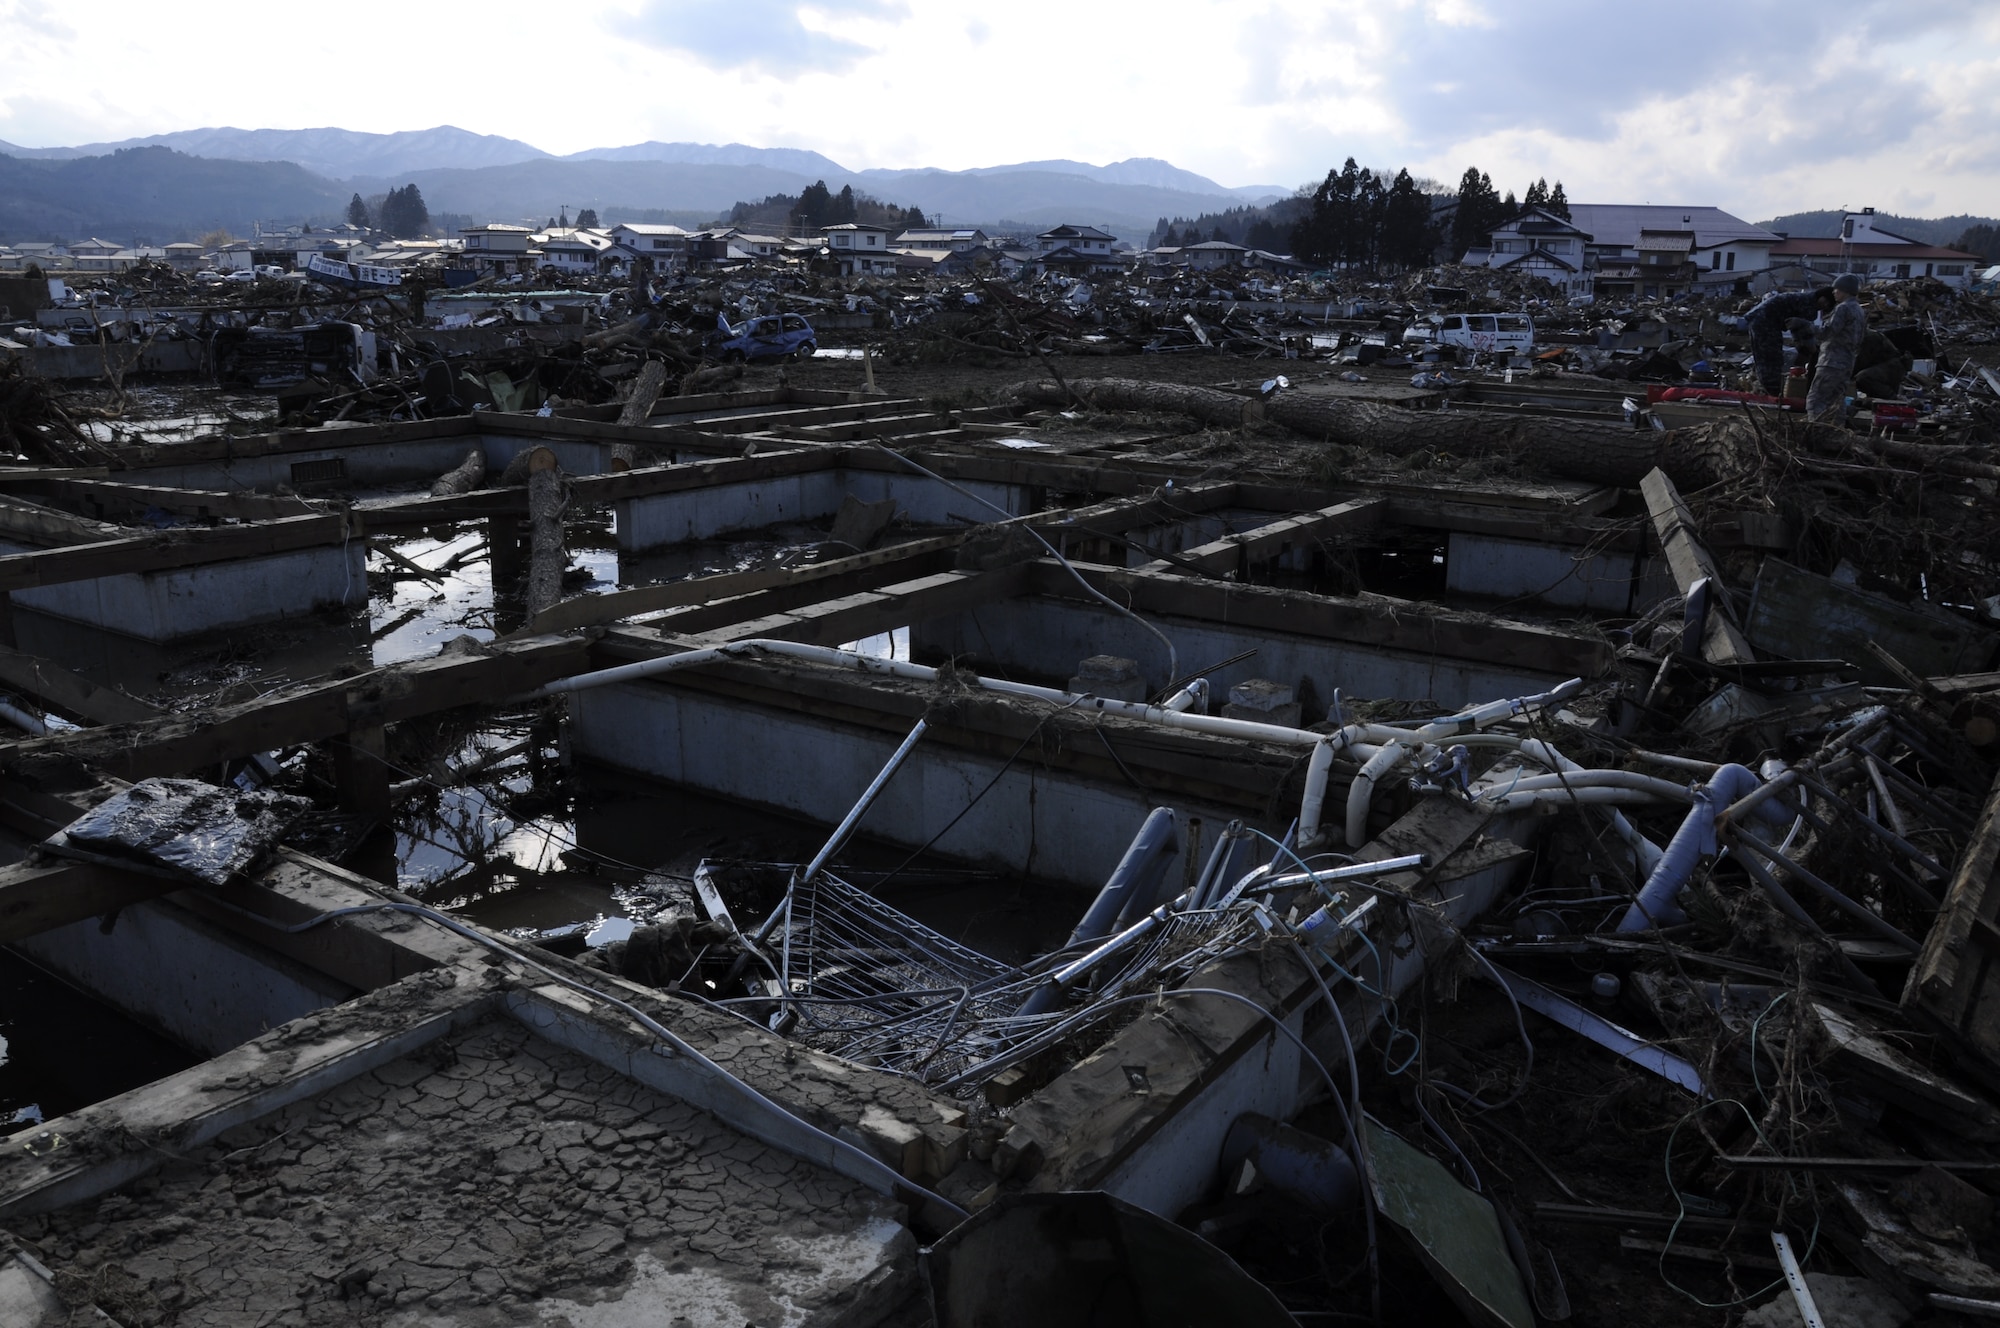 NODA MURA, Iwate, Japan – The coastal village here was heavily damaged as part of the March 11 earthquake and tsunami that struck Northern Japan.  Nearly 40 U.S. service members and civilians left Misawa Air Base, Japan, to assist in tsunami cleanup and relief efforts in the village as part of Operation Tomodachi. (U.S. Air Force photo by Senior Airman Joe McFadden/Released)